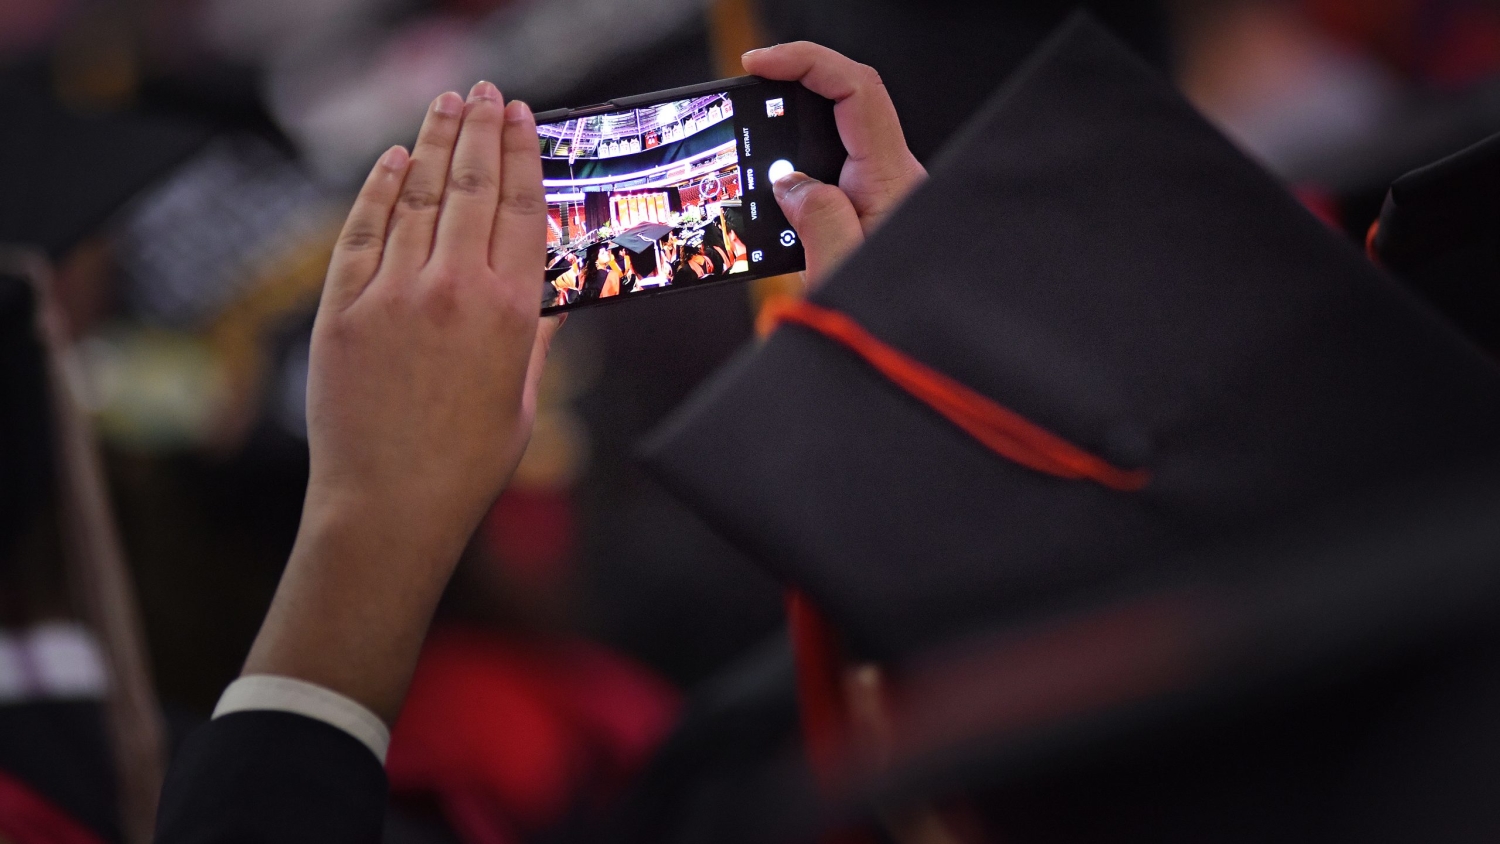 A graduate student takes a cell phone photo at the commencement ceremony